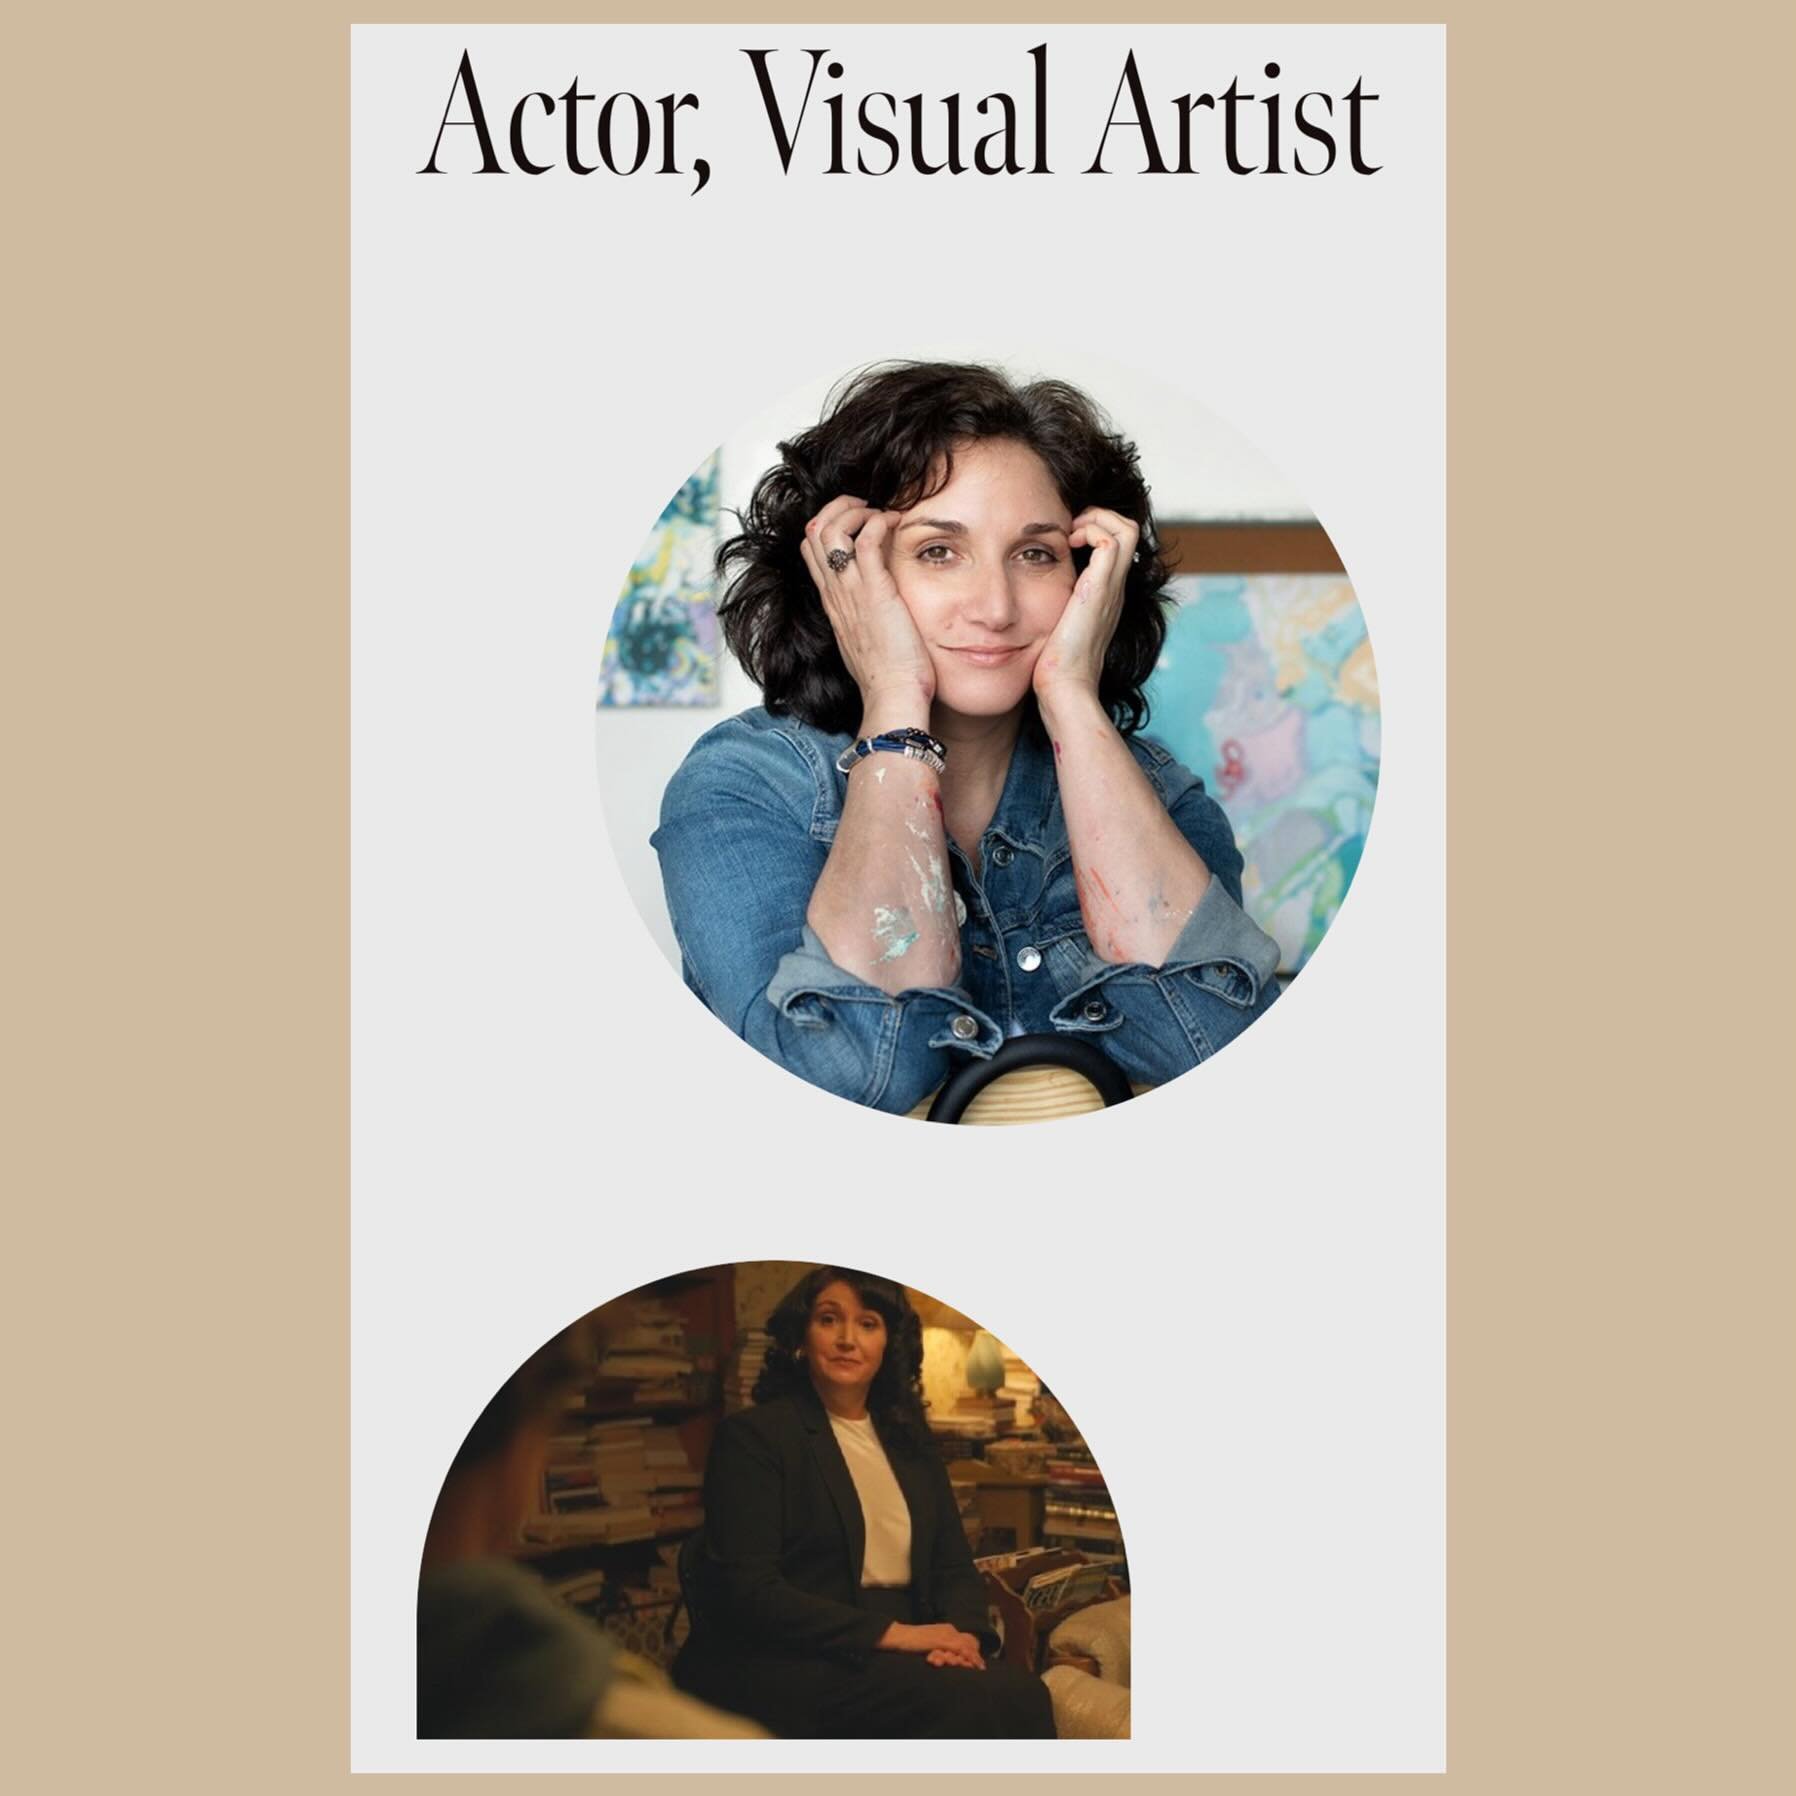 I&rsquo;ve decided to make it easy on myself and combine my acting and my art on one website. Please have a look if you have nothing else to do and give me your feedback 🙃
jessicaruthfreedman.com